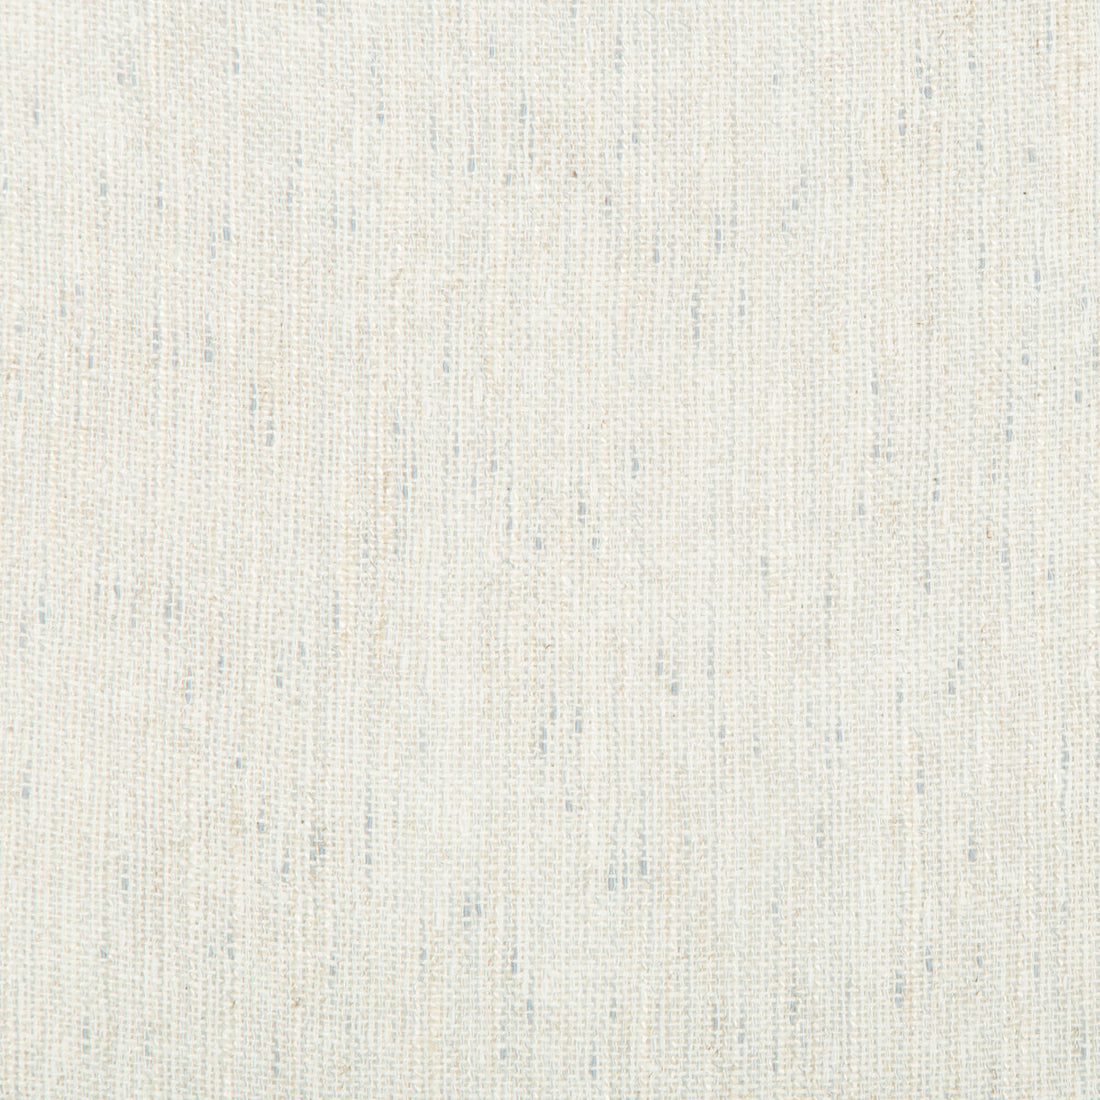 Perlino fabric in icicle color - pattern 4480.1611.0 - by Kravet Couture in the Sue Firestone Malibu collection